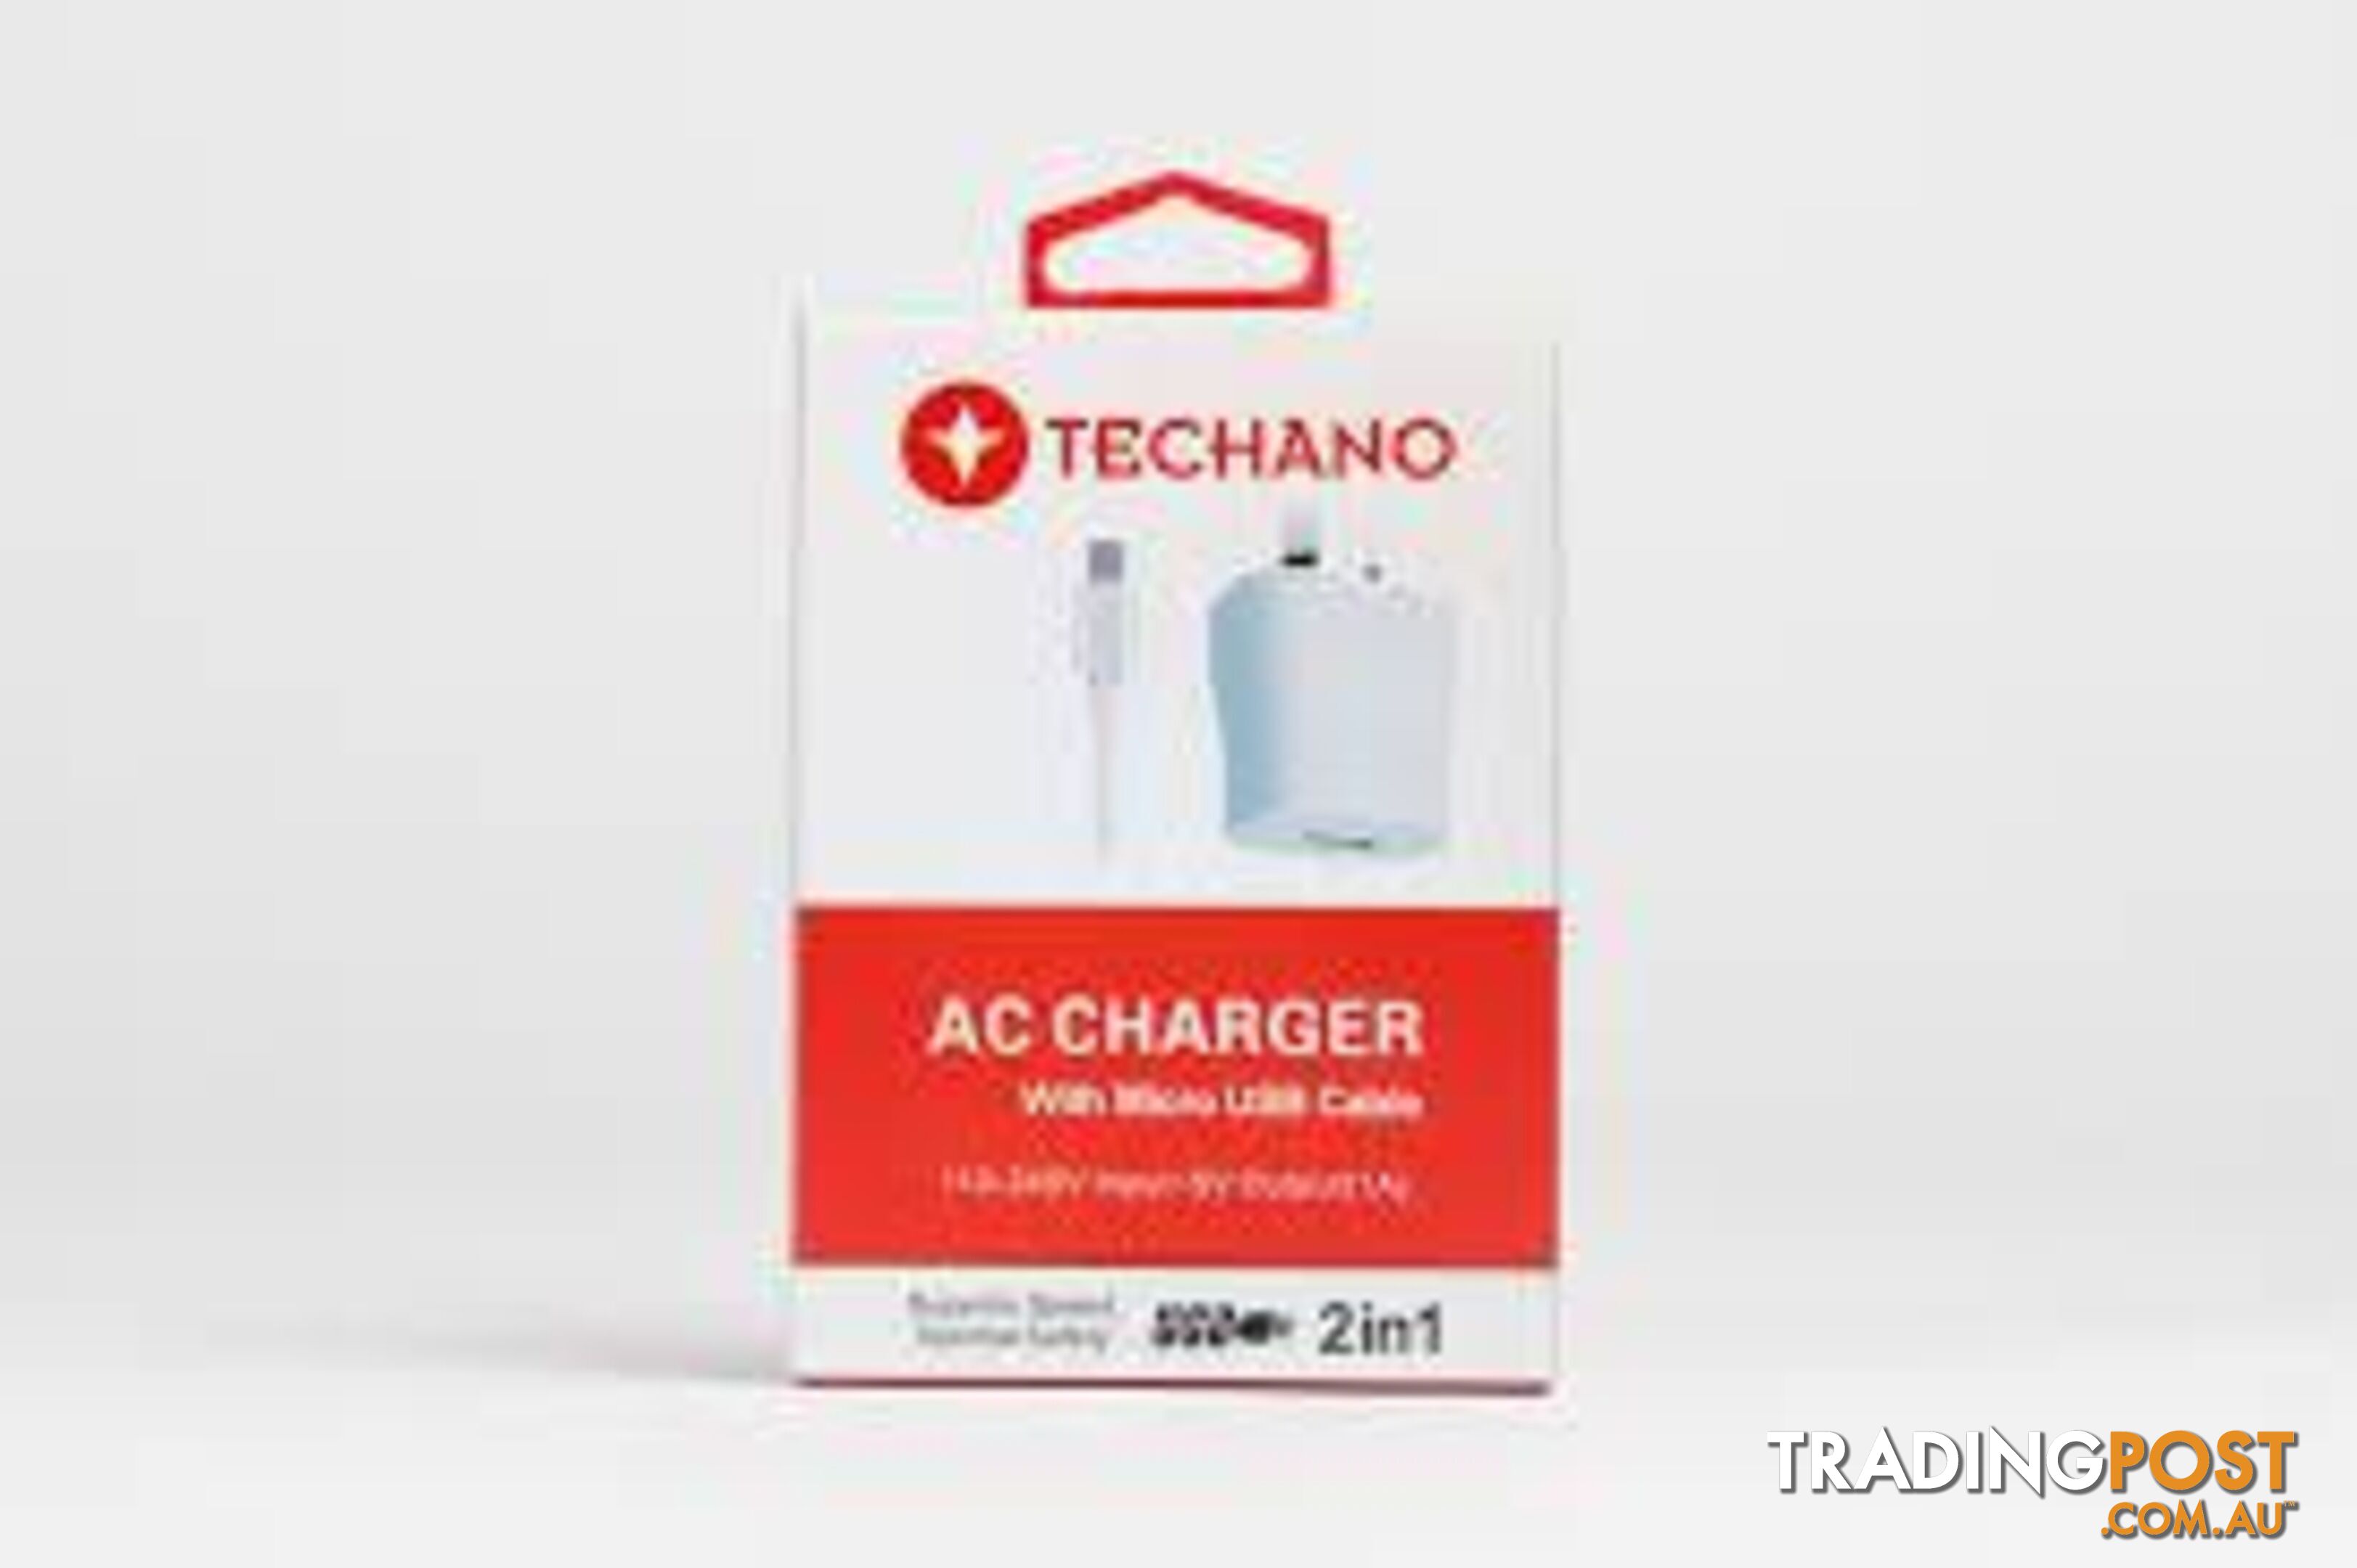 Techano AC Charger Kit with Micro USB Cable - 14C61A - Charging & Power